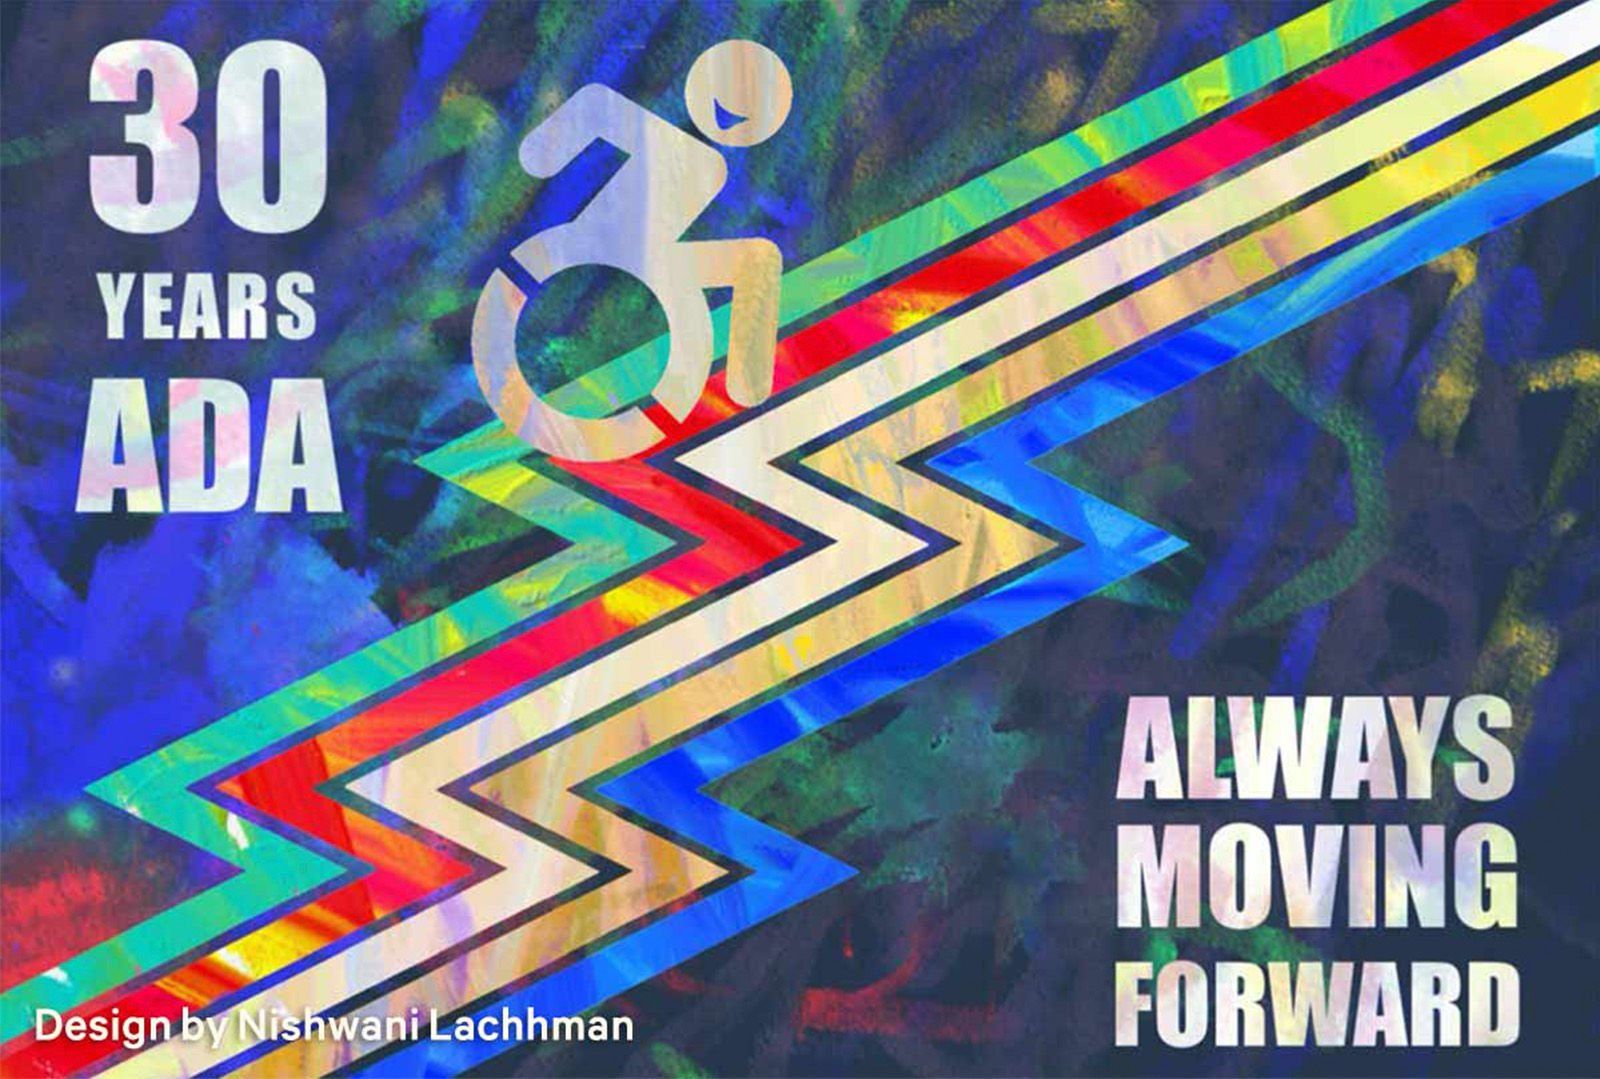 A digital photo of Annie's art. Prominent colors are blue, yellow, white, green and red for the Disability Pride flag. The wheelchair icon is white on top of the flag with a smily face. Top left text says 30 years ADA. Bottom right text says Always Moving Forward. Bottom left says Design by Niswani Lachhman. The two sides of the flag have the same colors of the flag in lighter tones of strokes going in a variety of directions adding a special artistic look to the image.   Progressive Disability Pride Flag